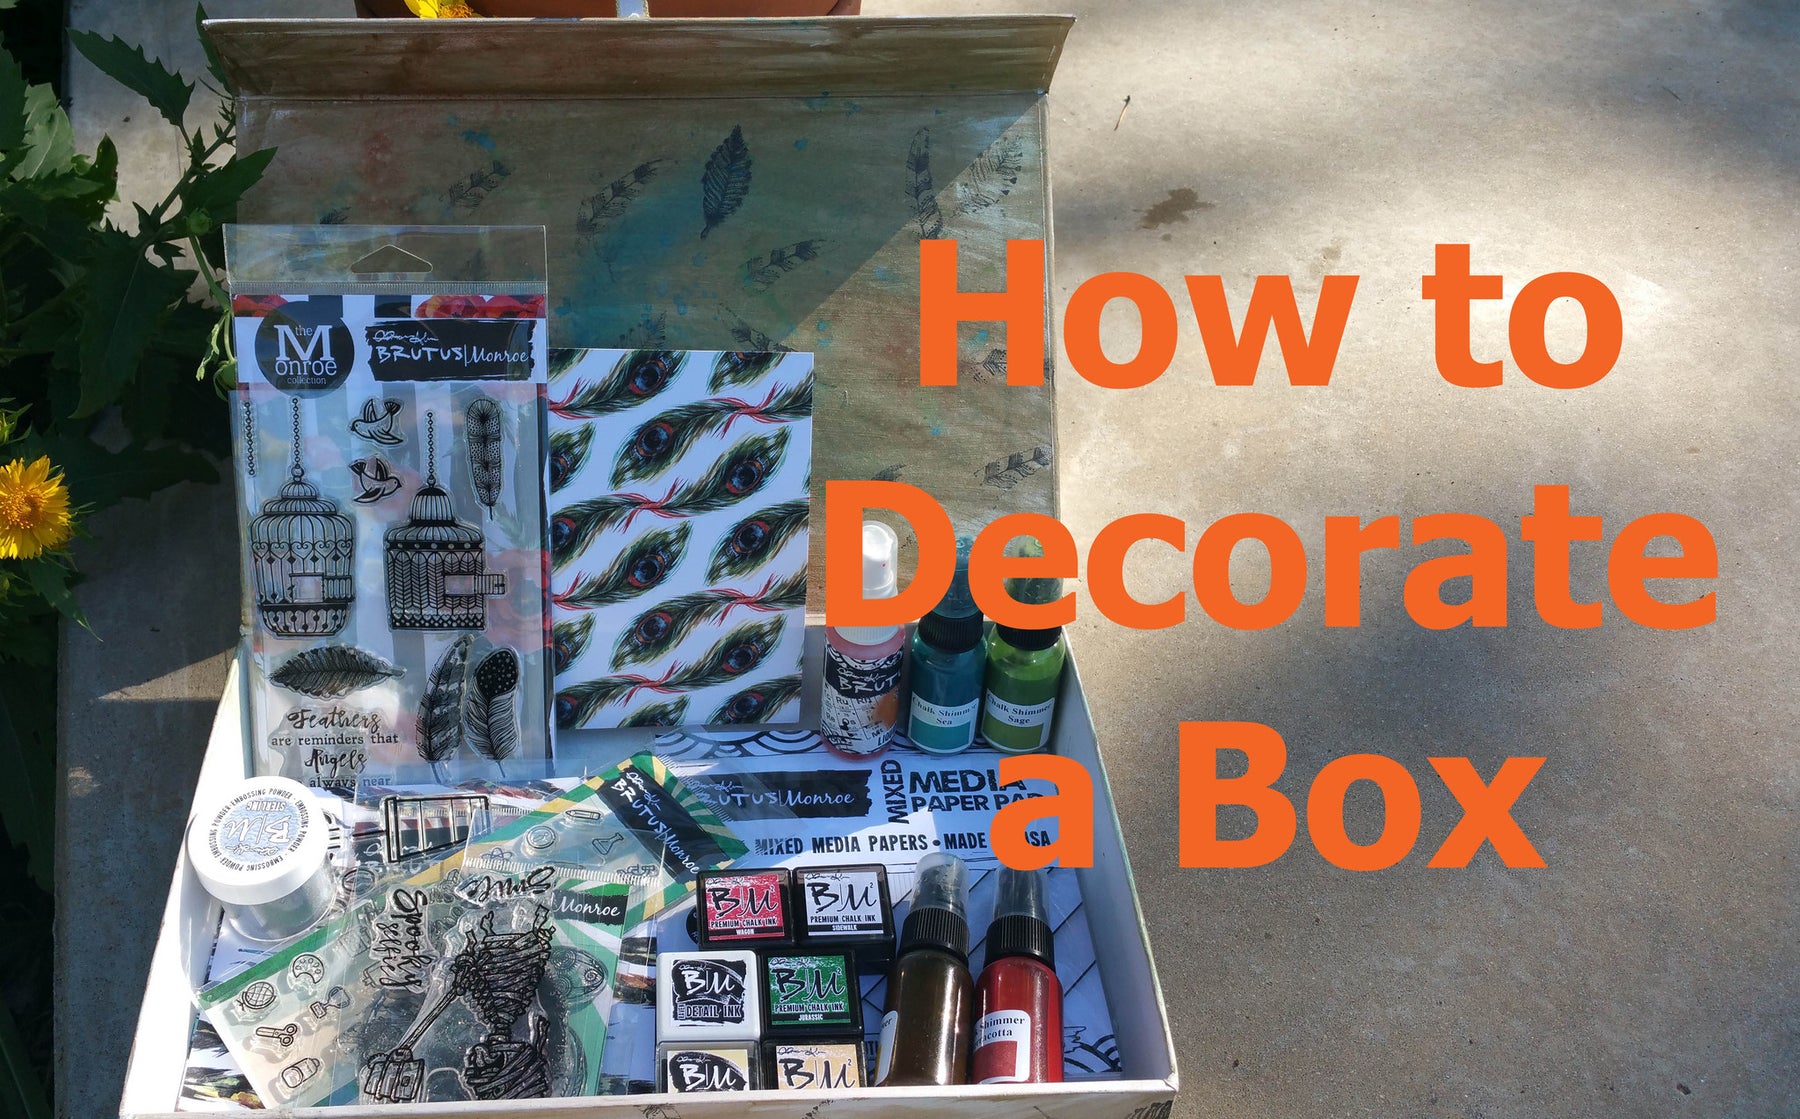 Decorating a box with Brutus Monroe Products